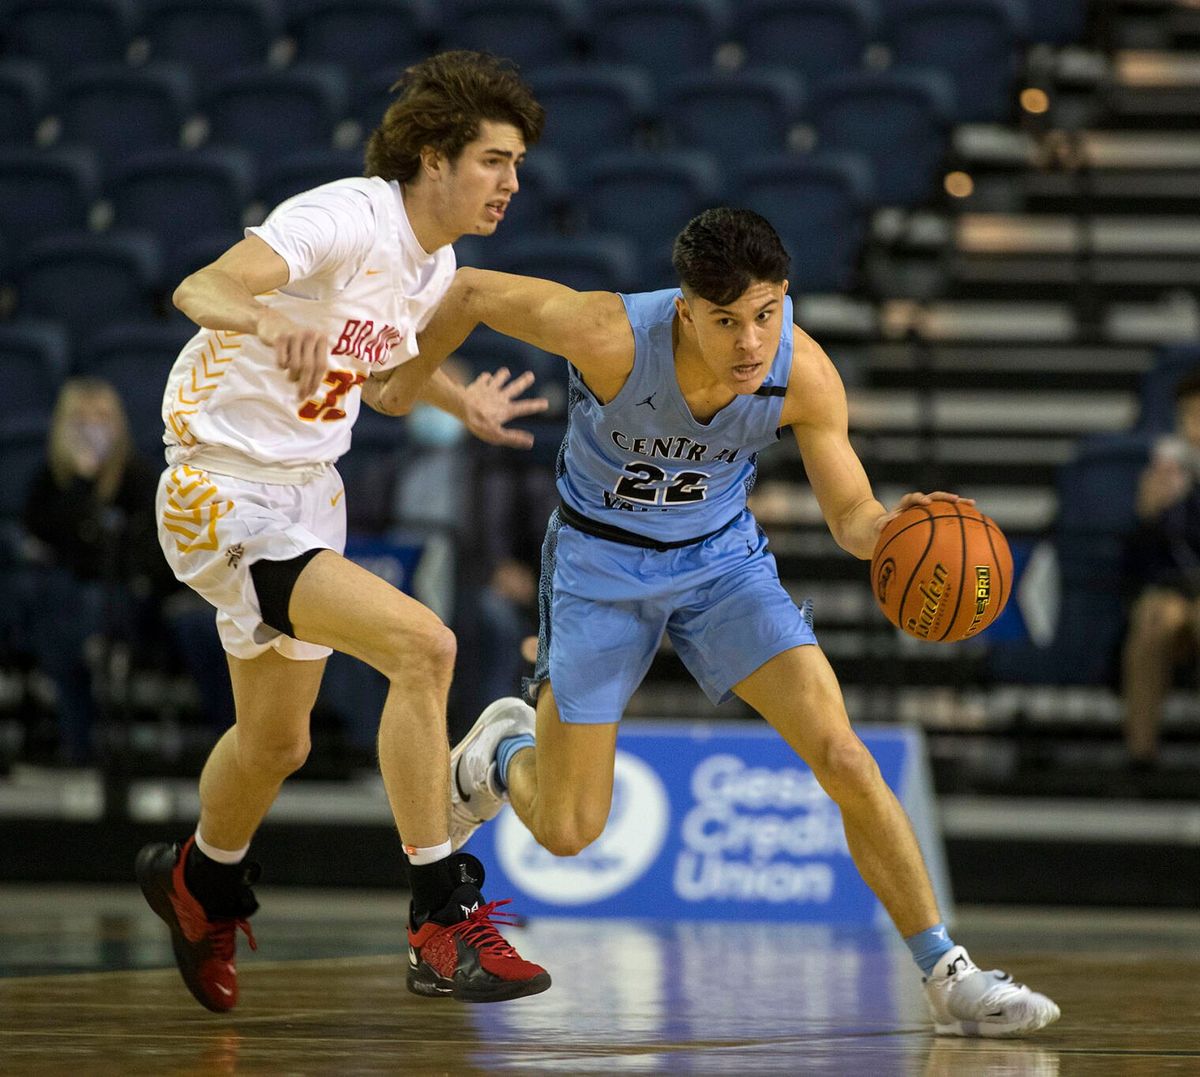 Central Valley guard Dylan Darling dribbles around Kamiakin’s Trey Arland during a State 4A State first-round loser-out game in Tacoma, Wash. on March 2, 2022.  (Patrick Hagerty/For The Spokesman-Review)